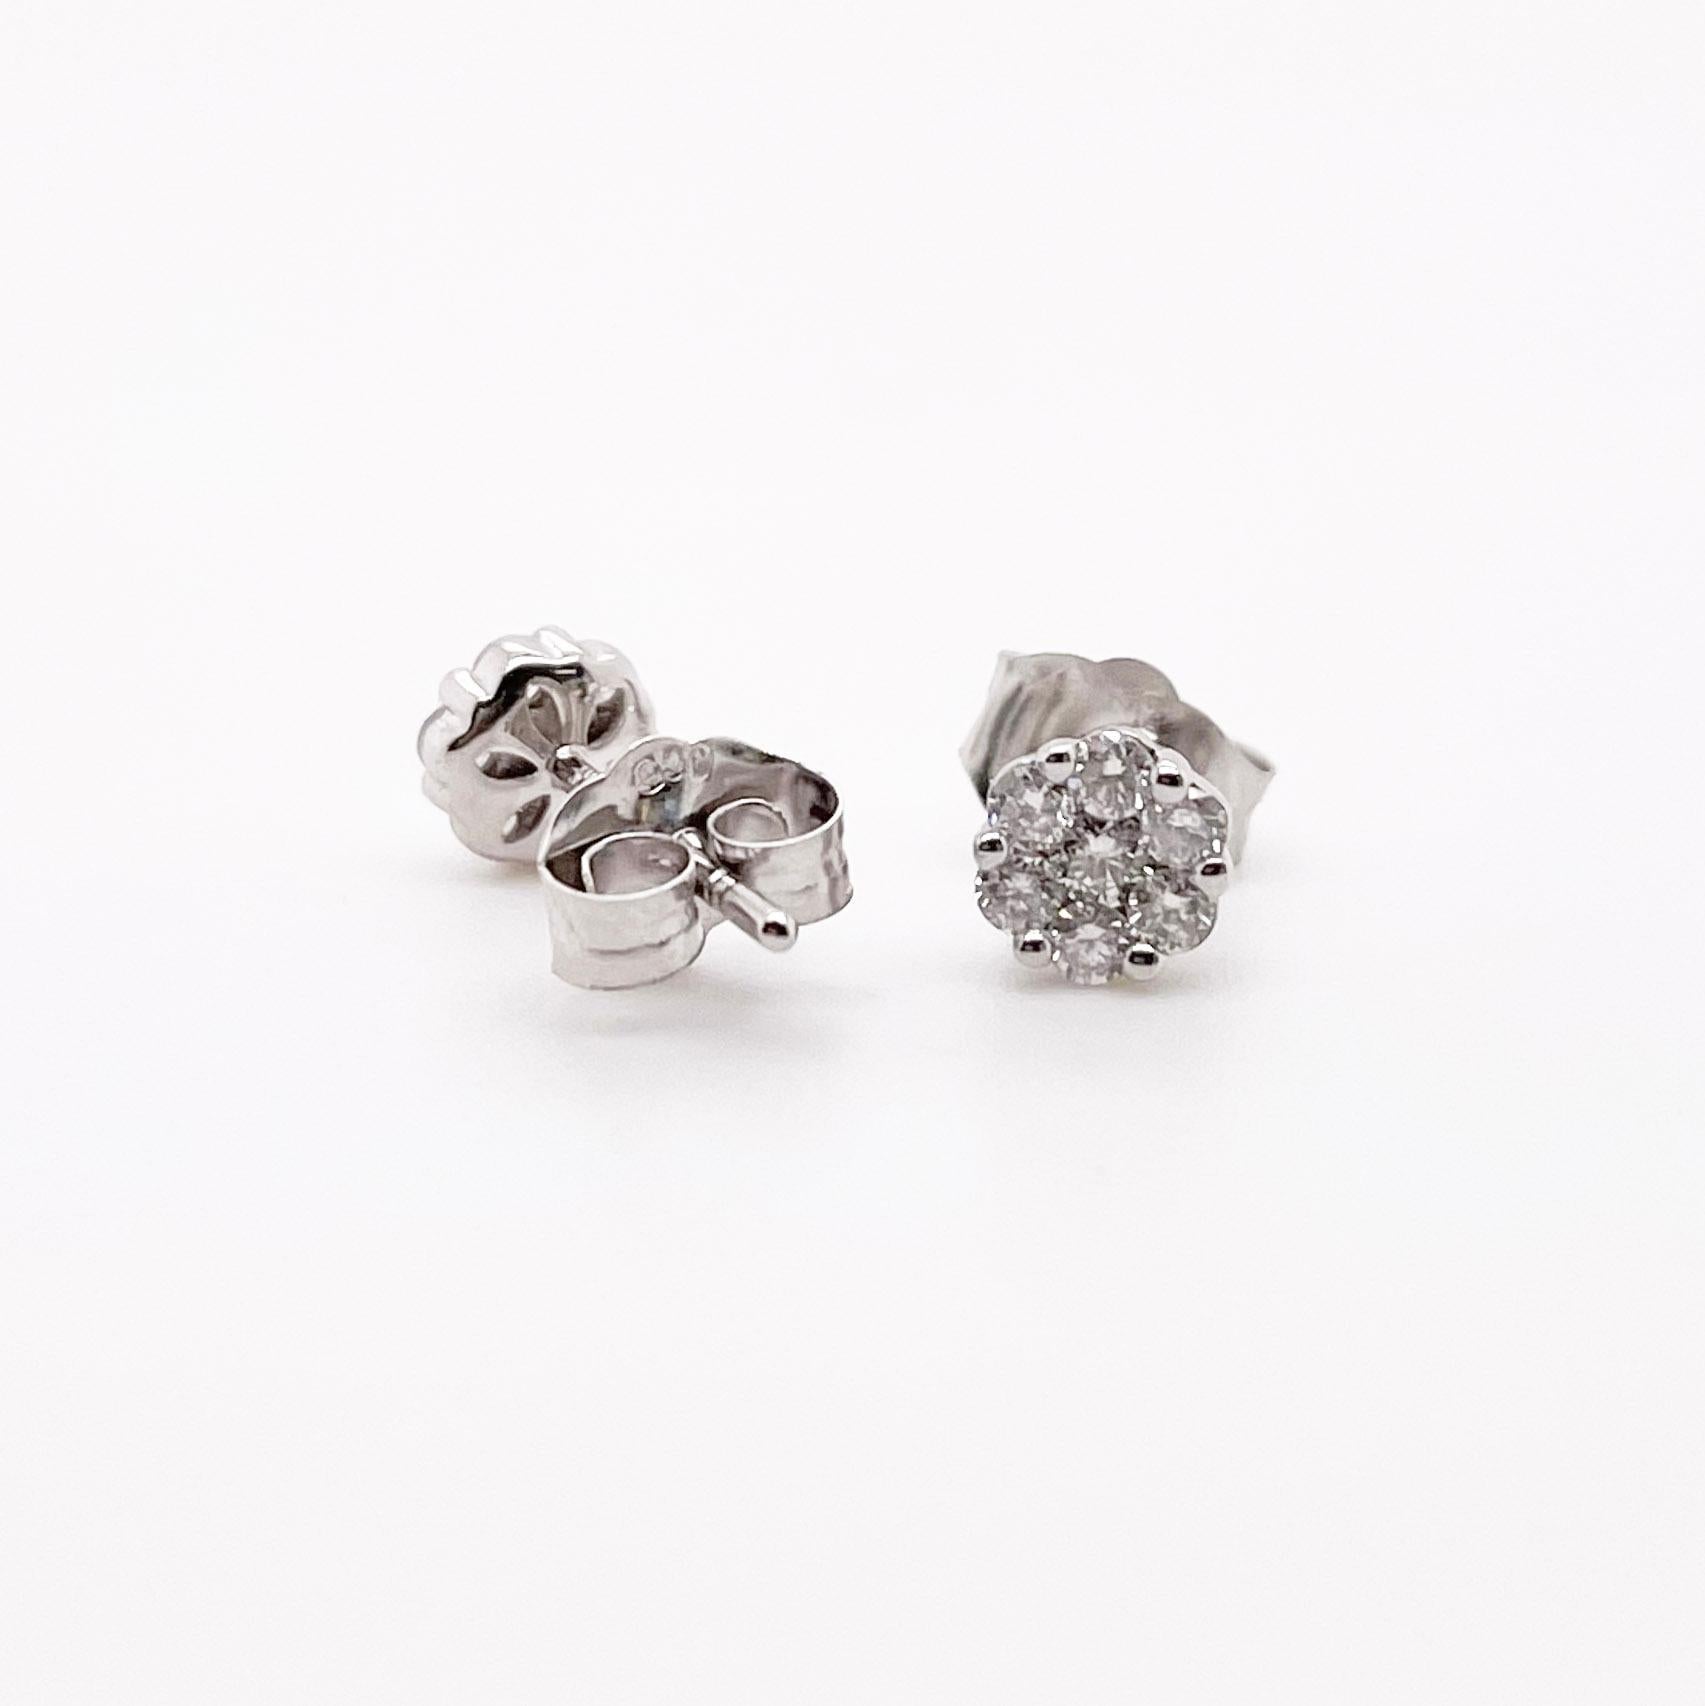 Contemporary Diamond Cluster Stud Earrings, White Gold, Floral Shape